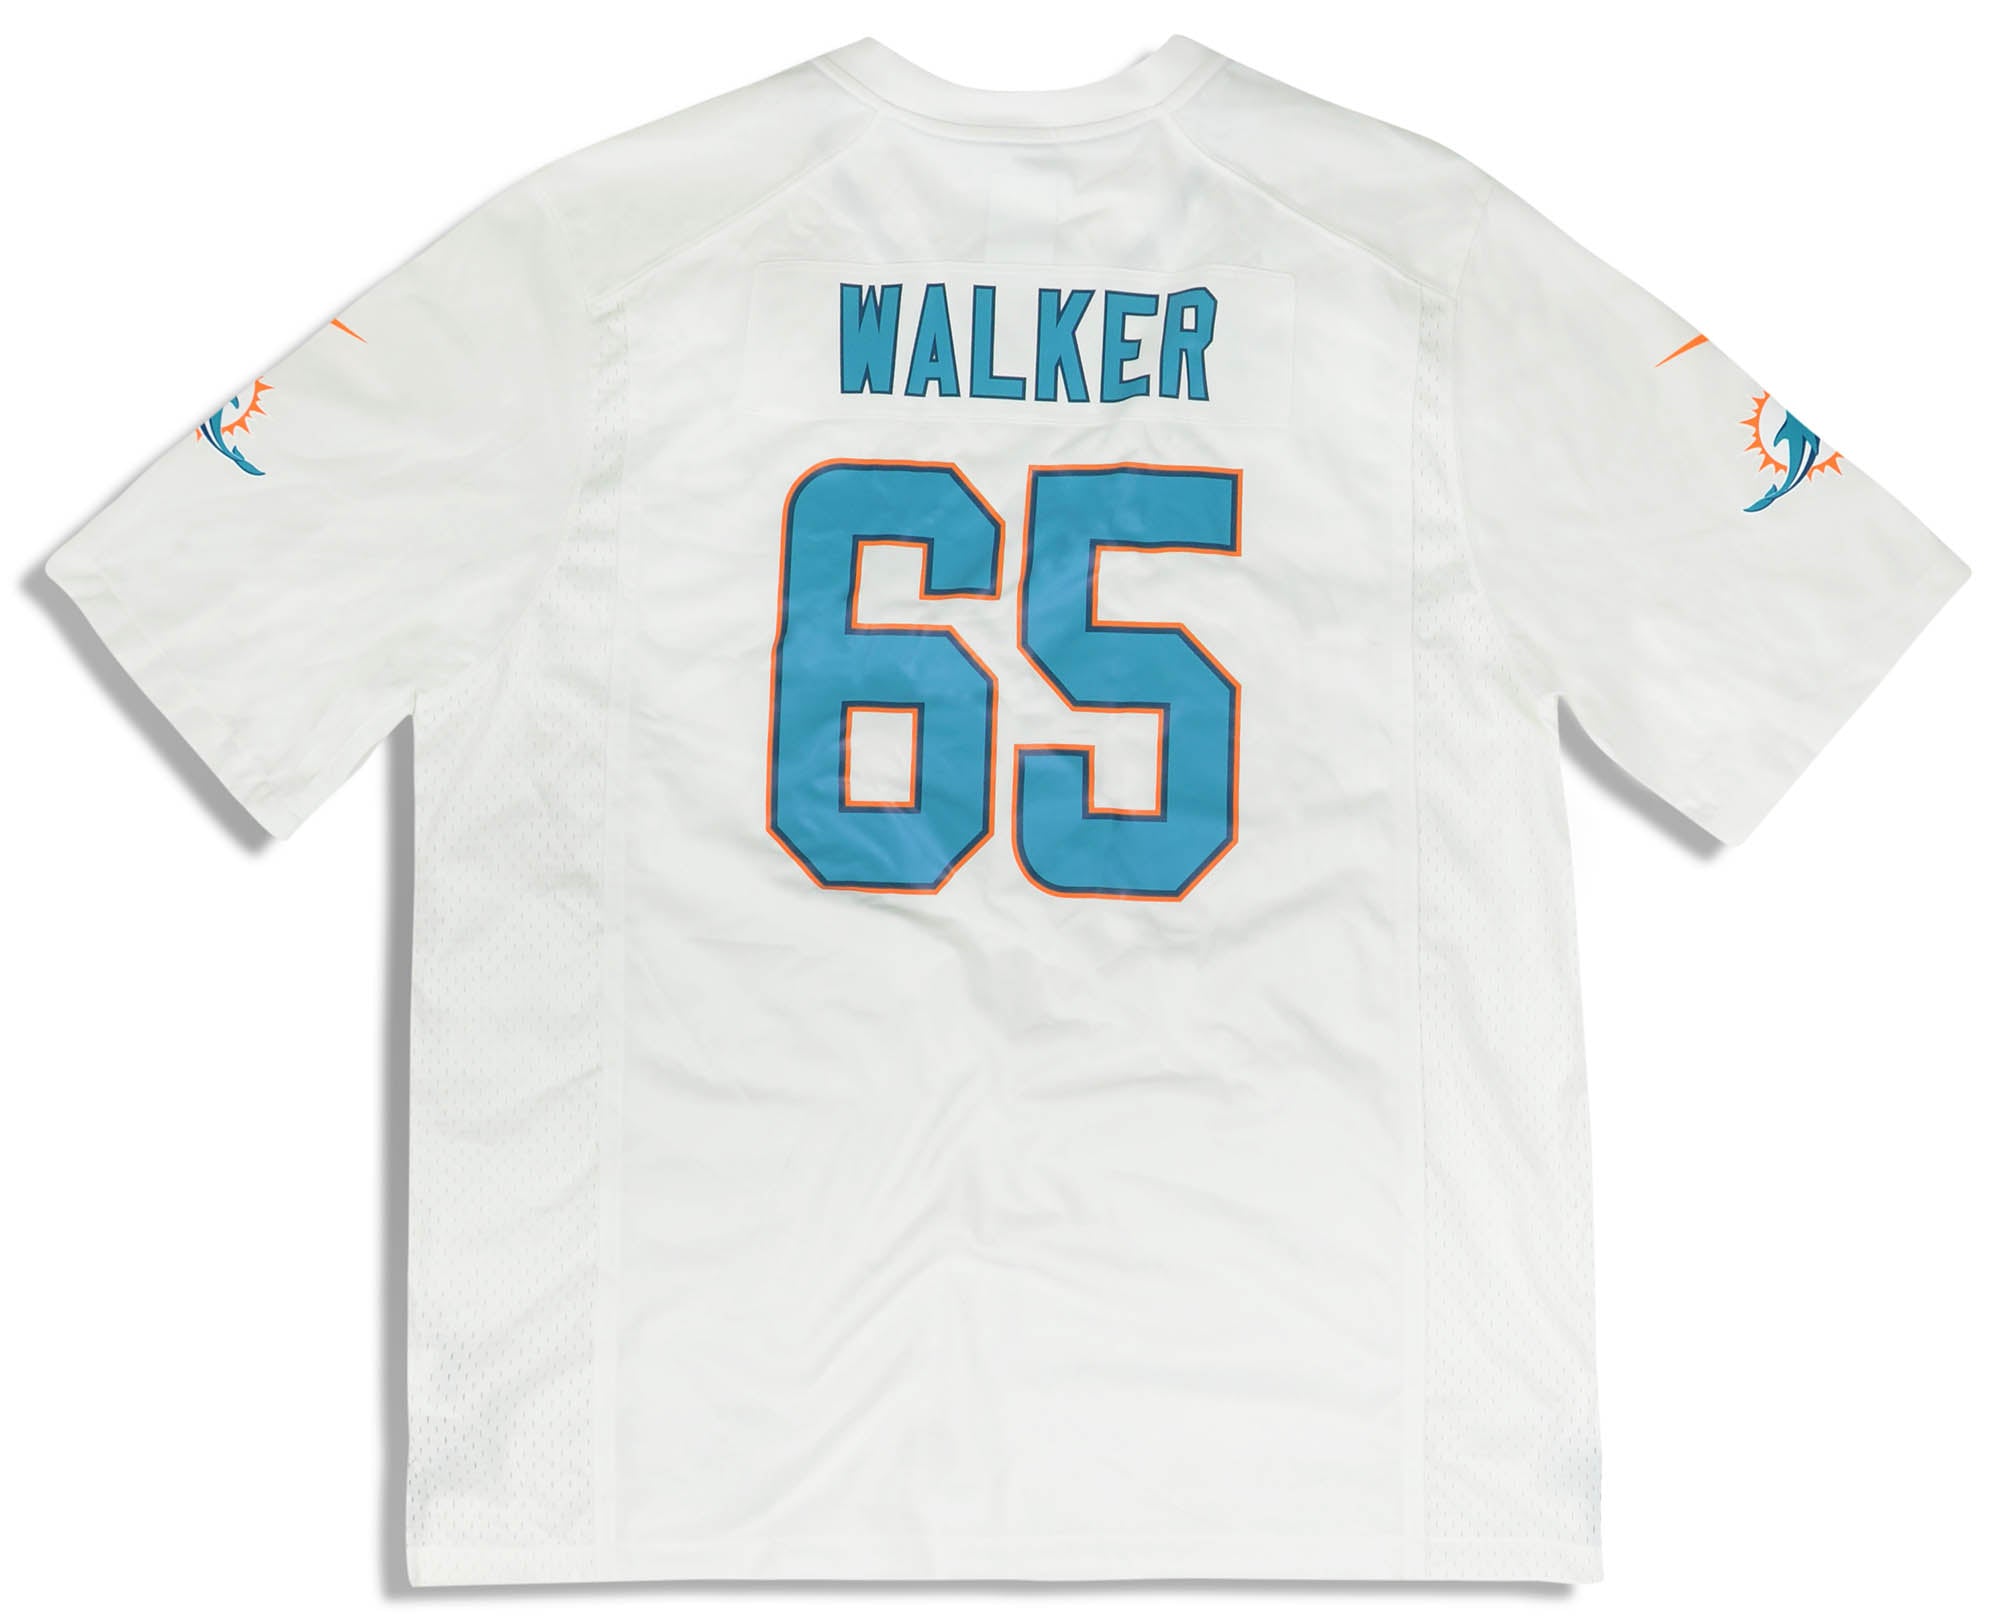 2018 MIAMI DOLPHINS WALKER #65 NIKE GAME JERSEY (AWAY) XL - W/TAGS